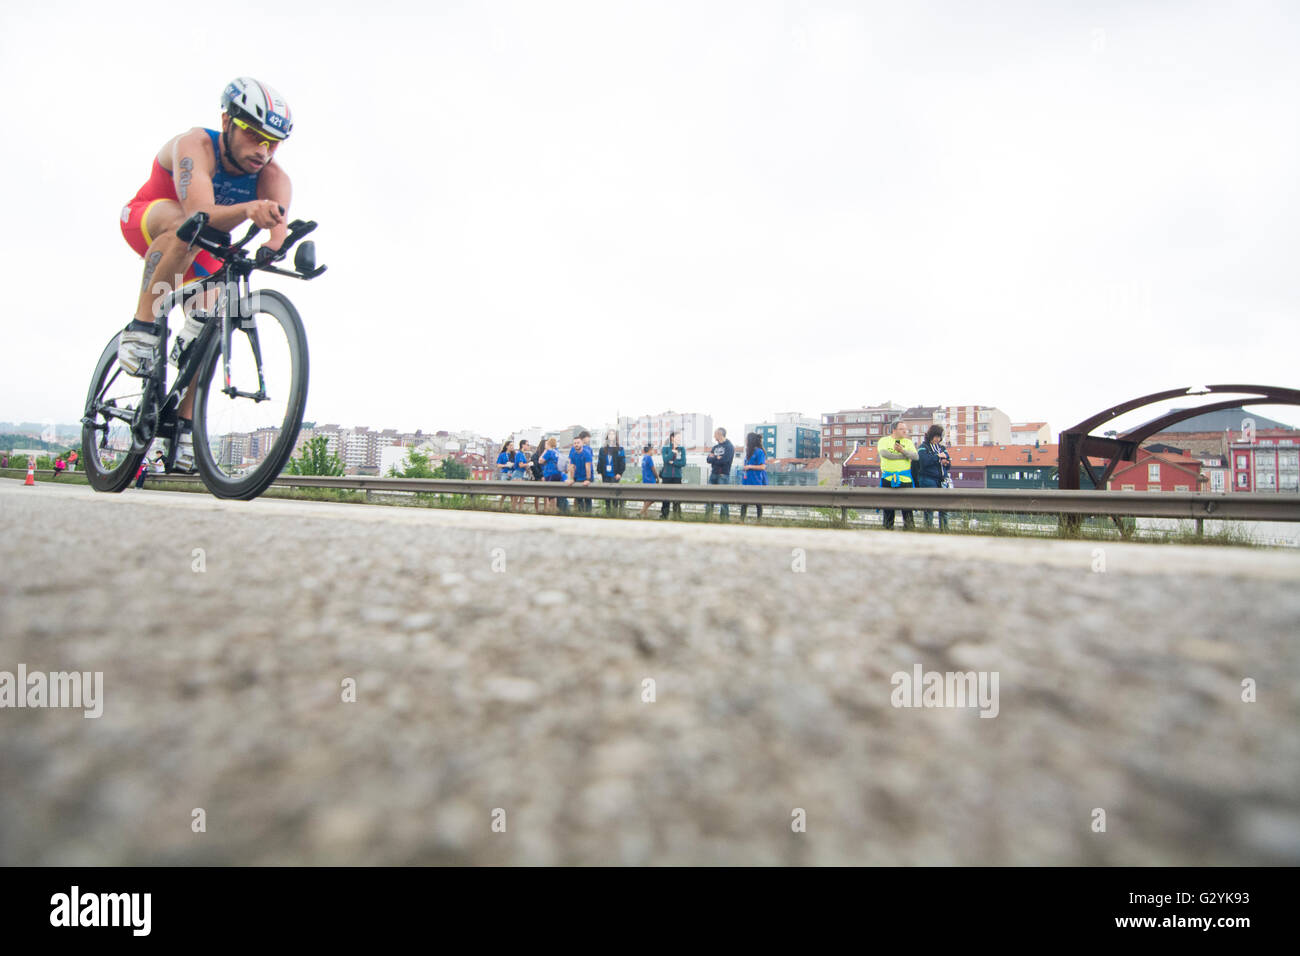 Aviles, Spain. 4th June, 2016. An athlete rides on bike during the paradhuatlon category of 2016 Aviles ITU Duathlon World Championships at Center Niemeyer on June 4, 2016 in Aviles, Spain. Credit: David Gato/Alamy Live News Stock Photo